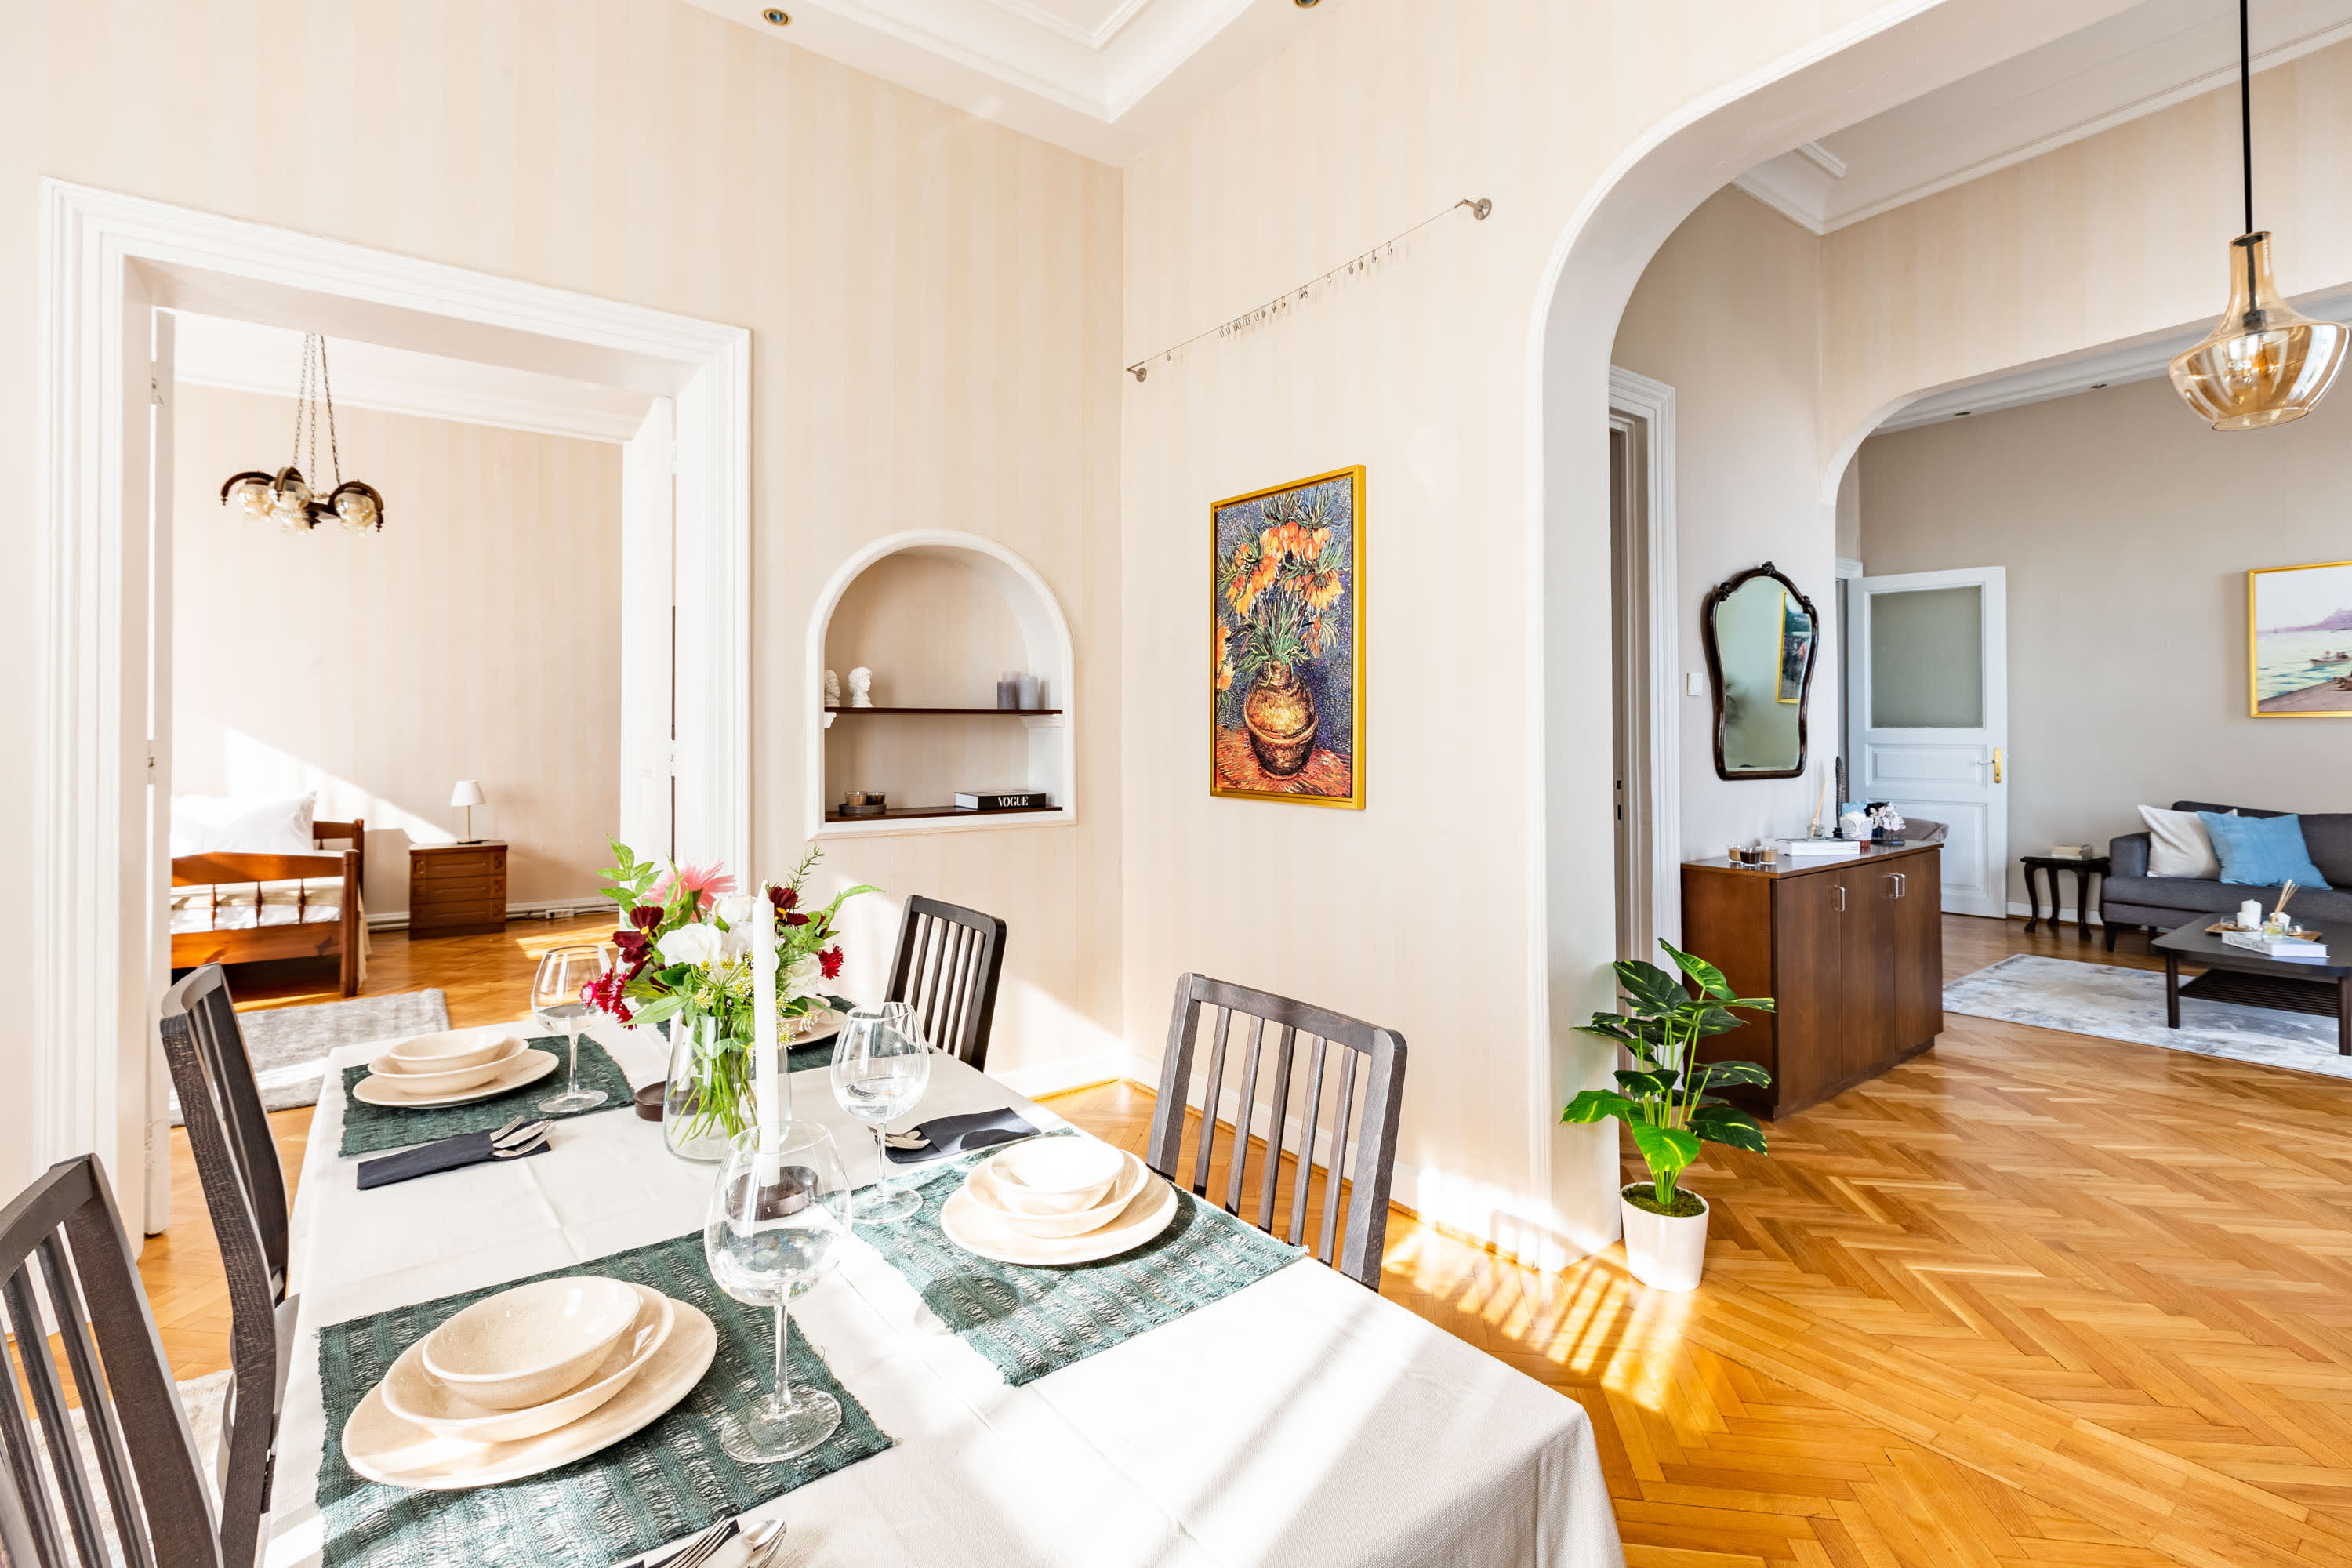 Property Image 2 - MISSAFIR Stunning Apartment in a Historic Building with Bosphorus View in Beyoglu